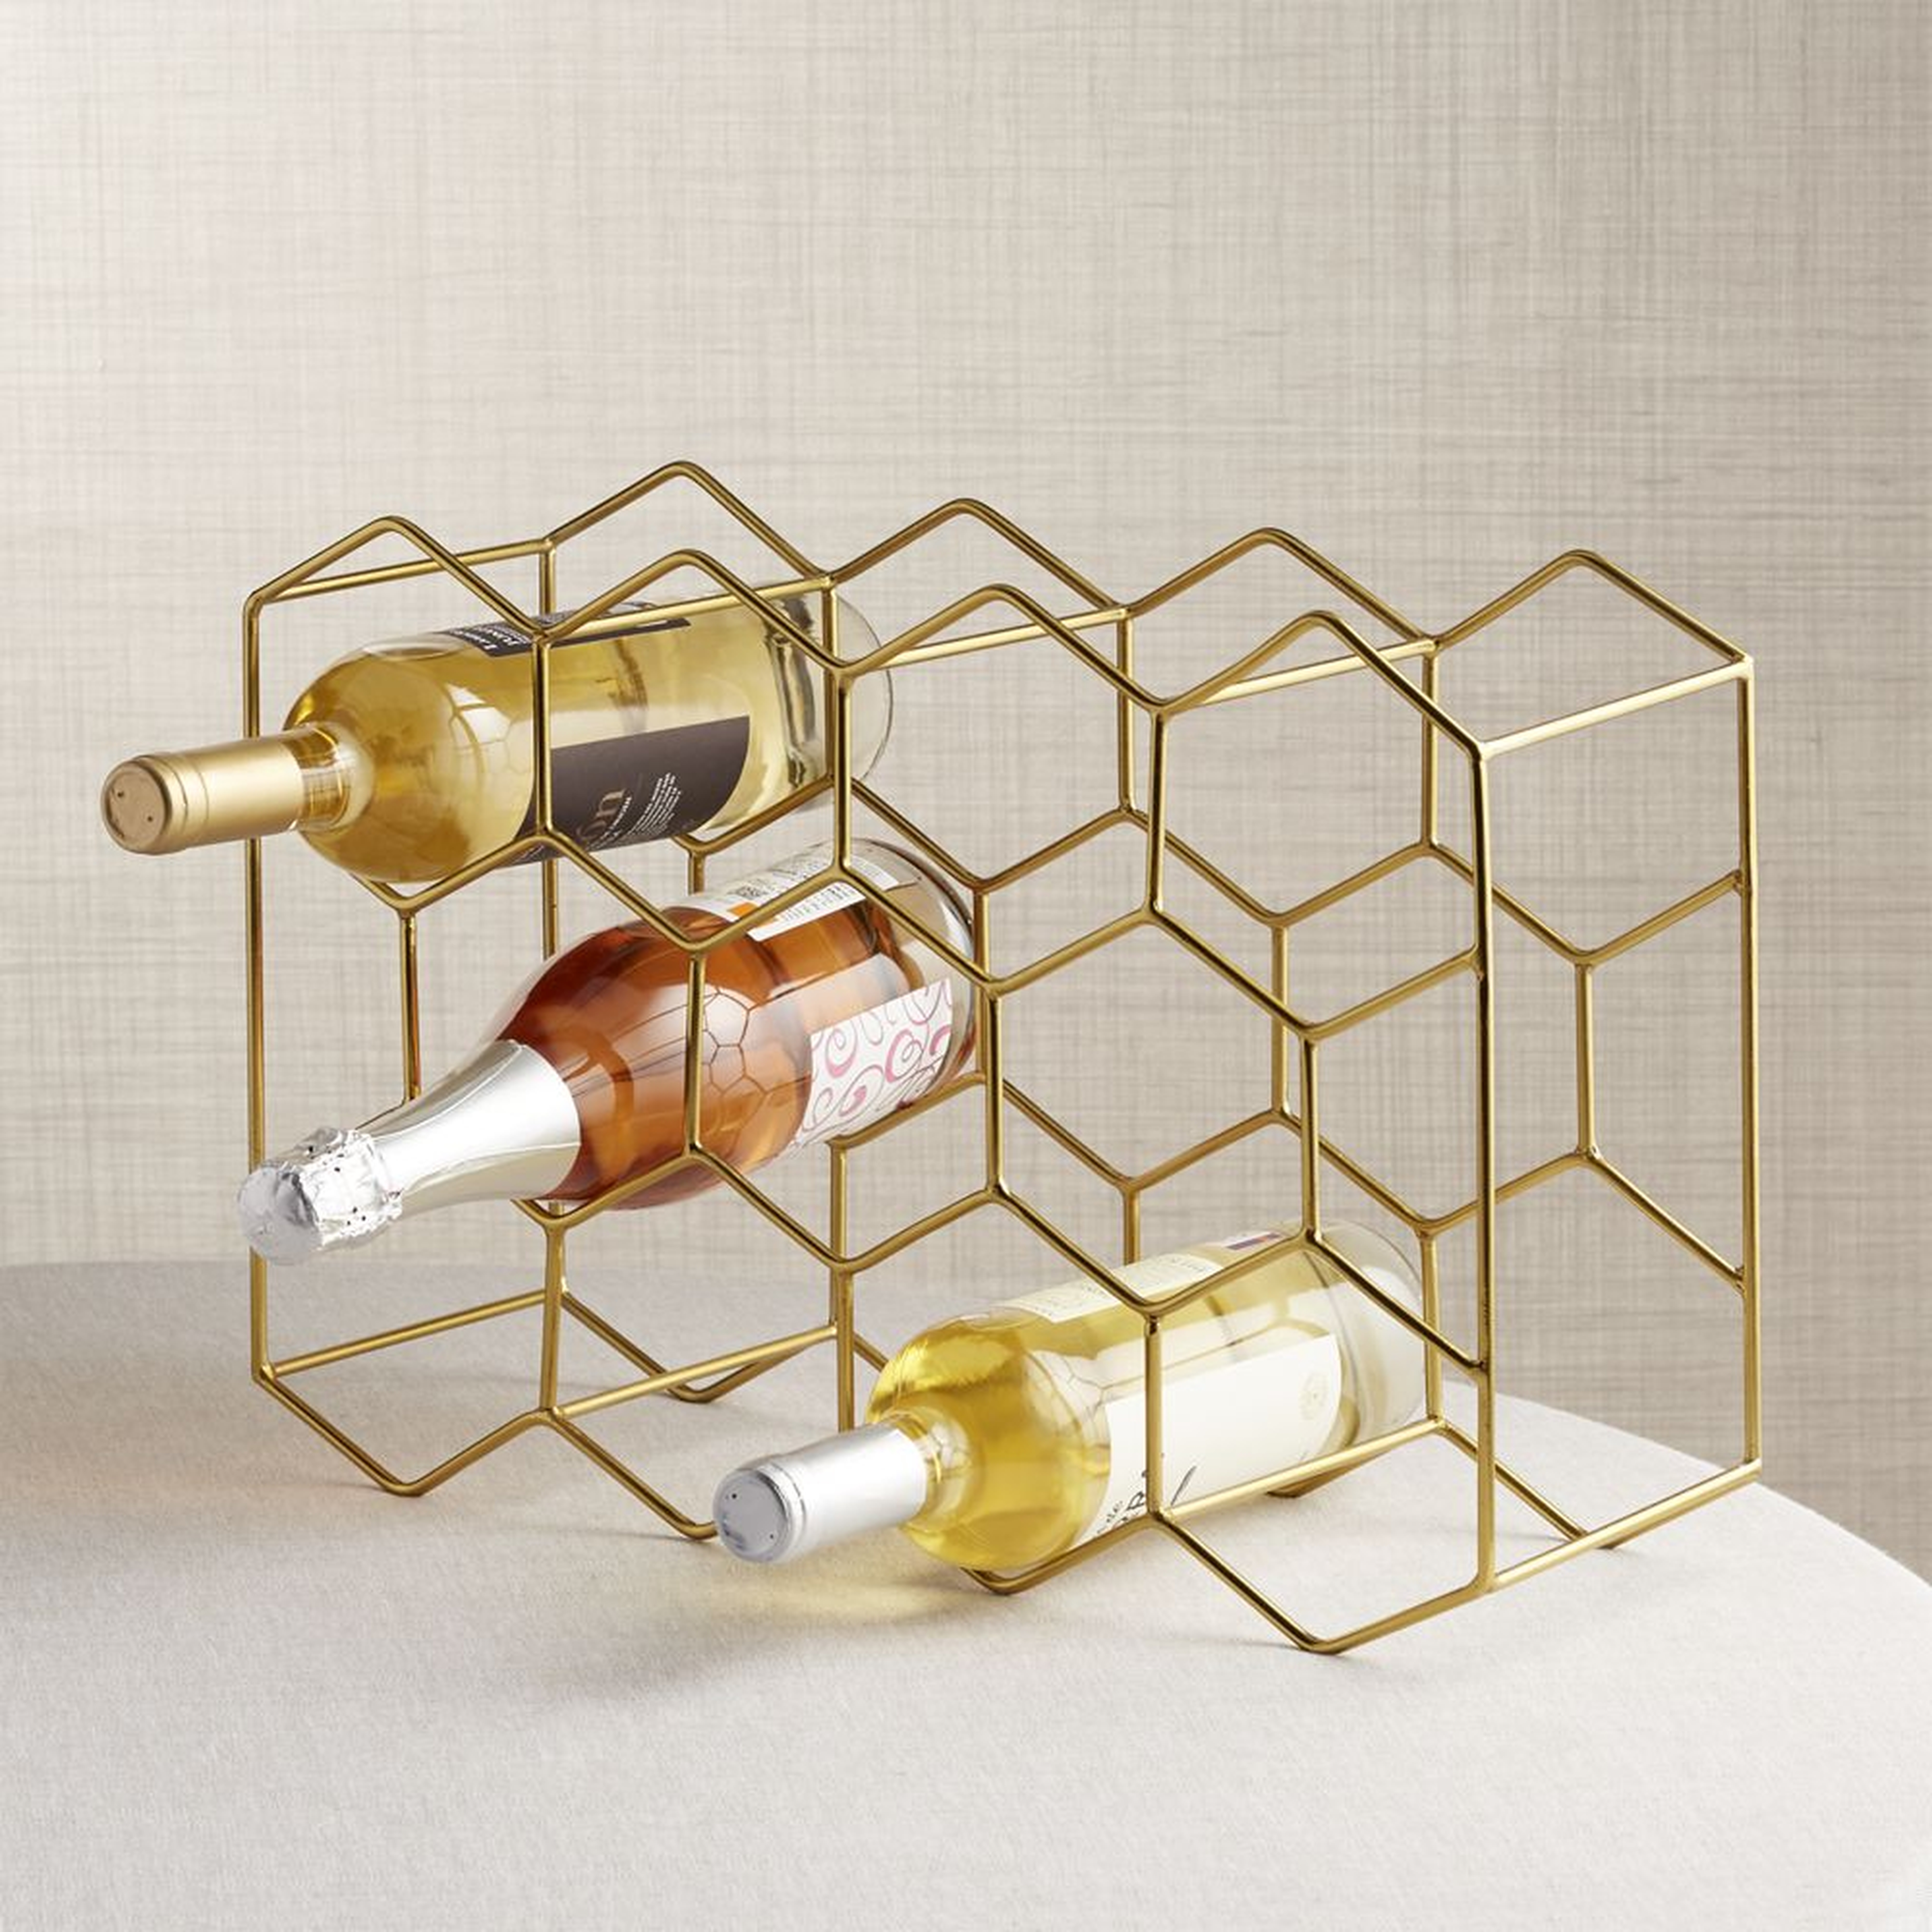 11-Bottle Gold Wine Rack - Crate and Barrel